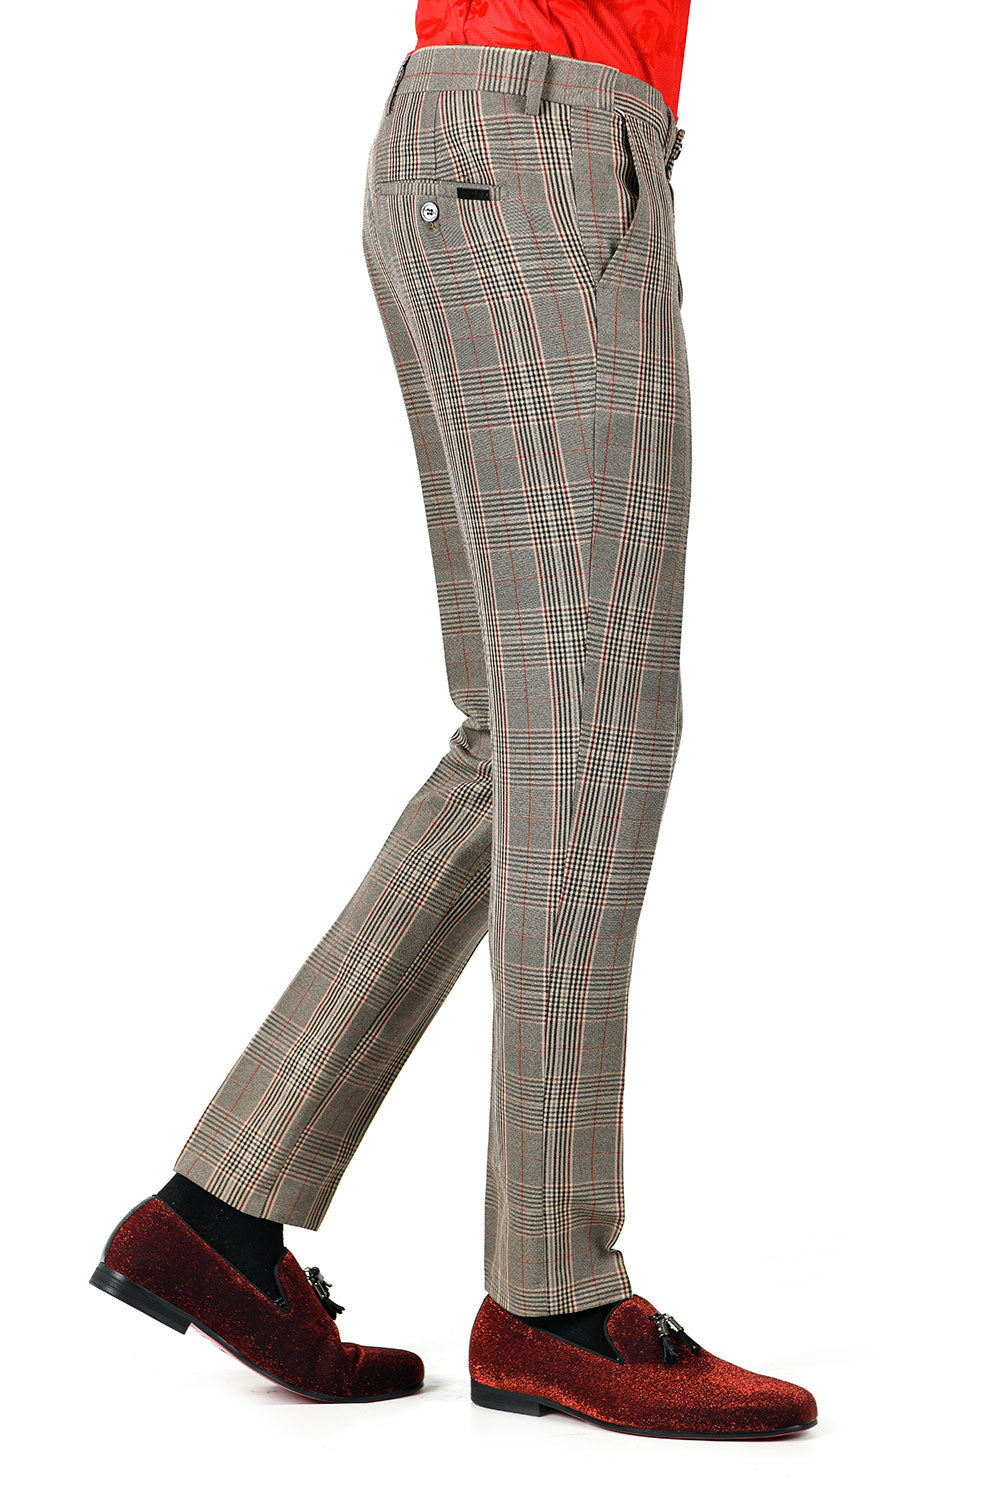 BARABAS men's checkered plaid Red and Brown chino pants CP29